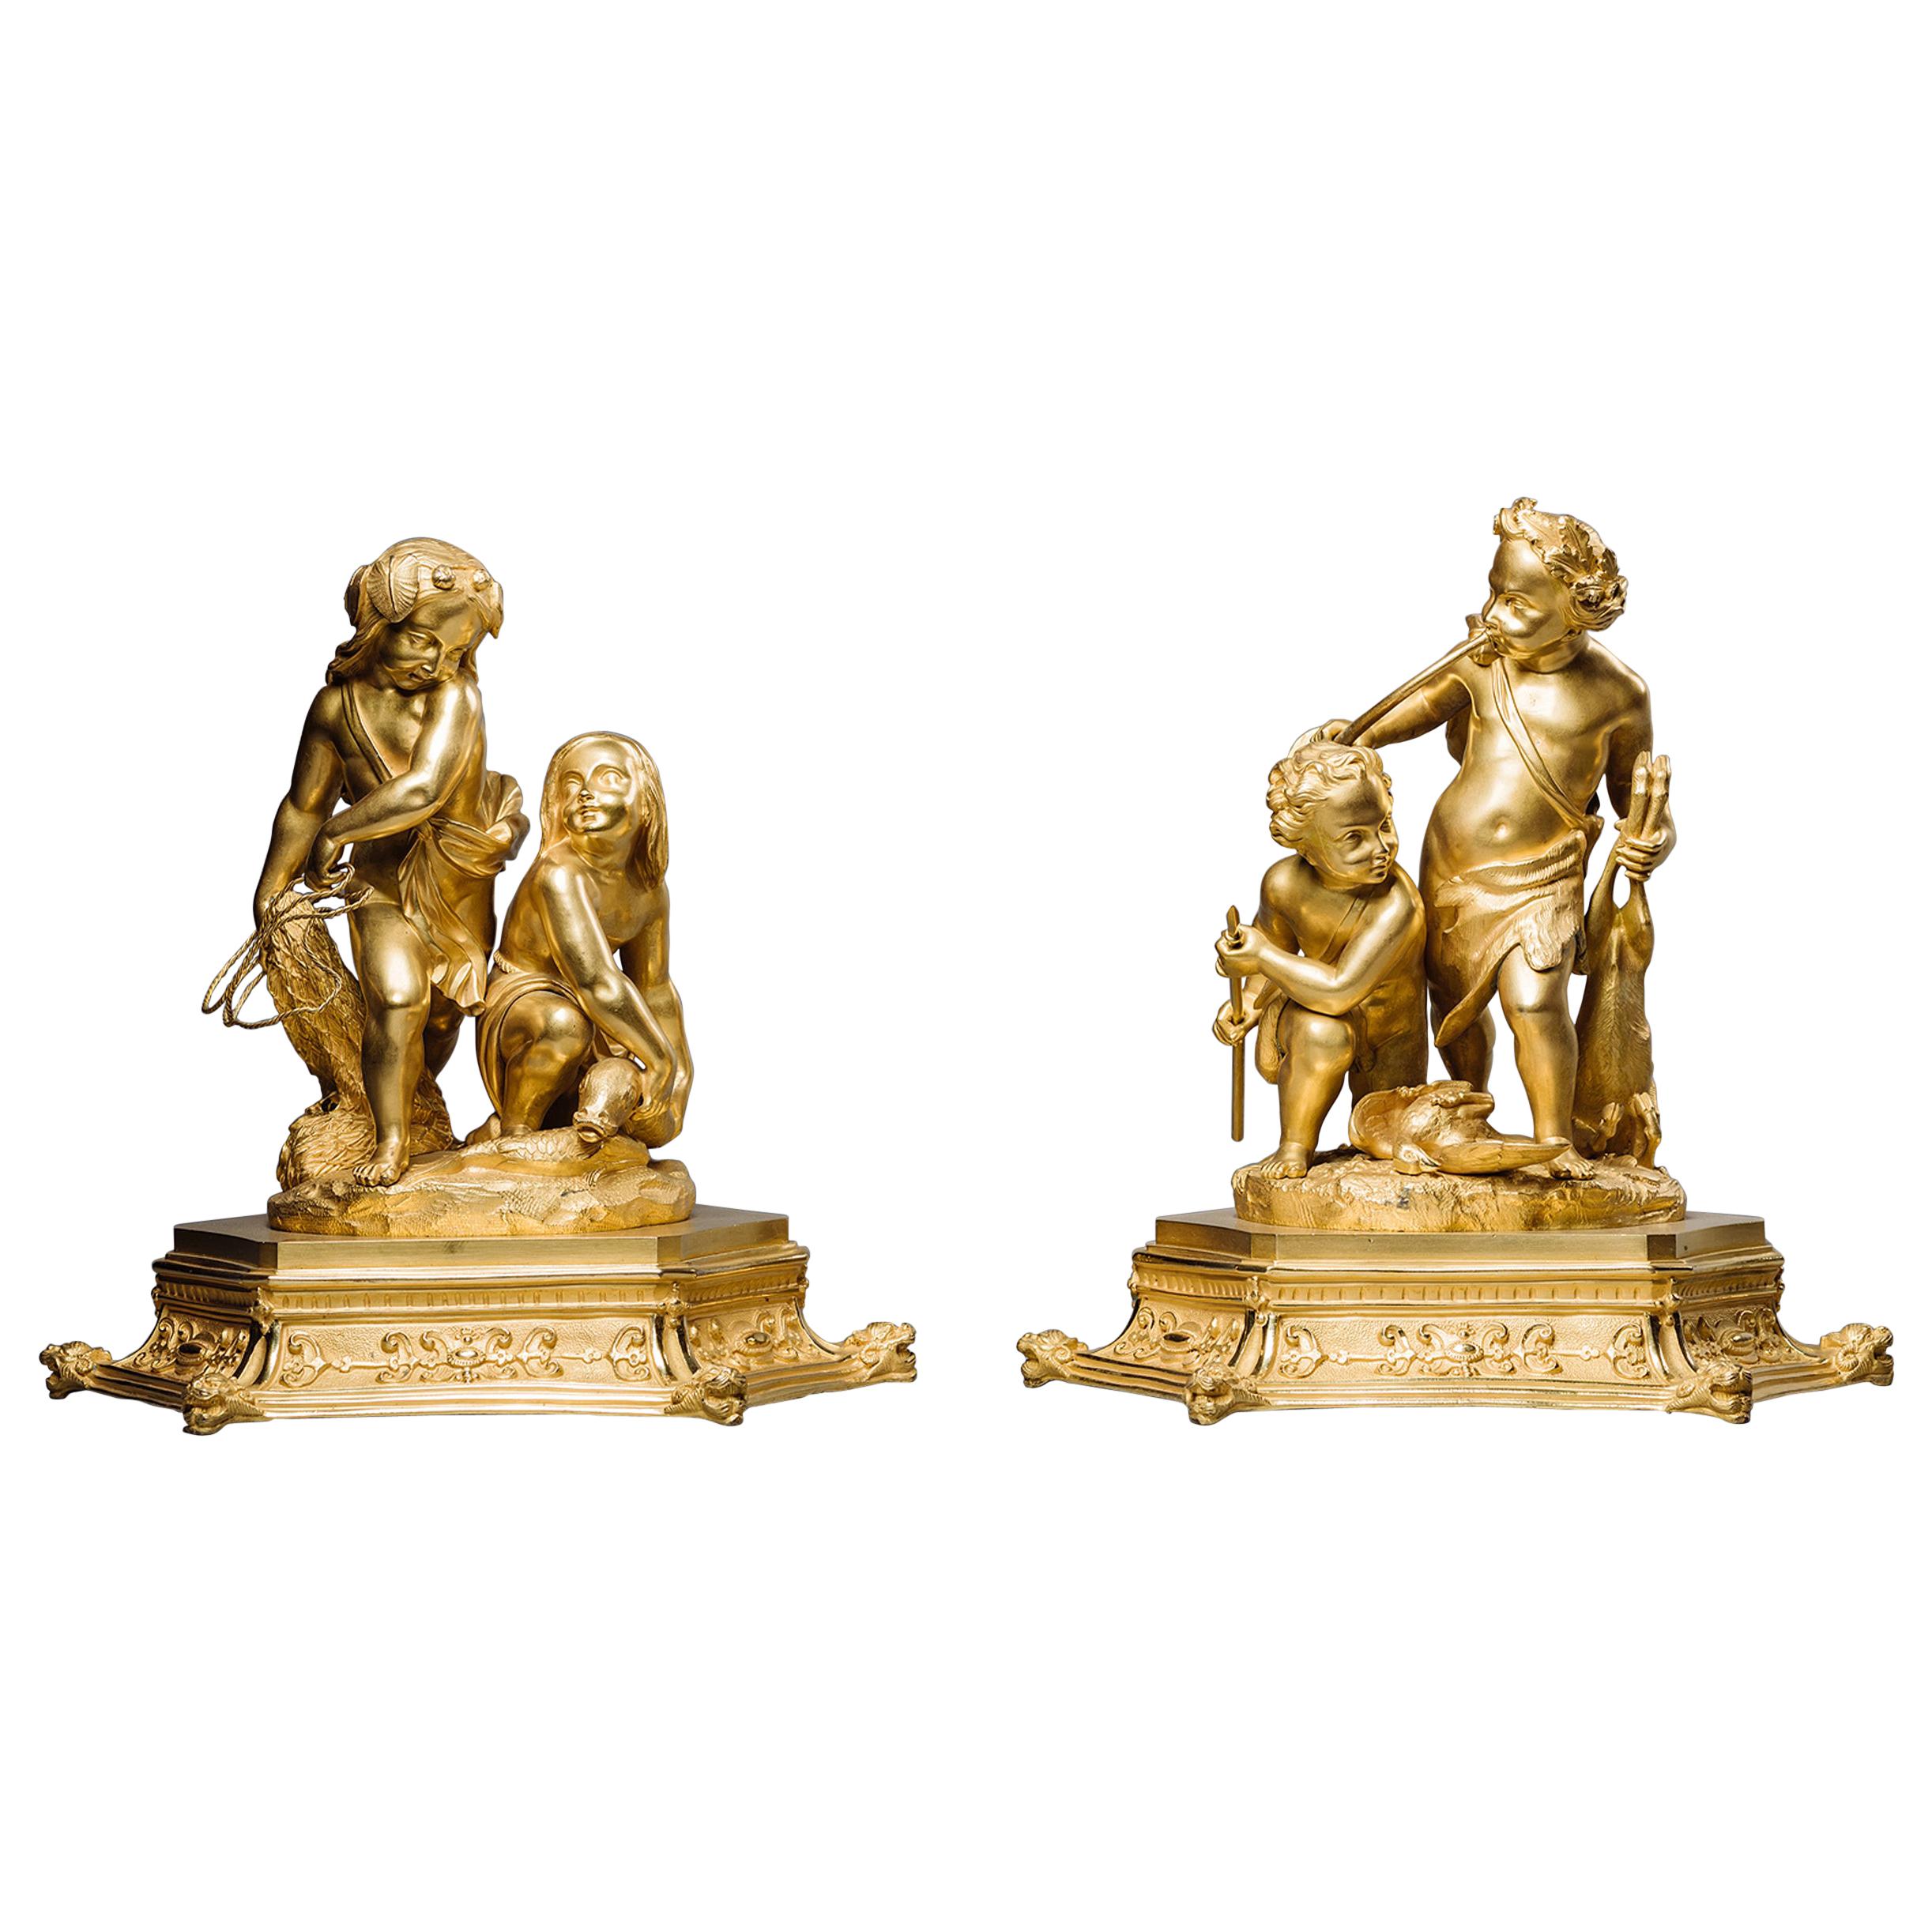 Pair of Restoration Period Gilt-Bronze Figural Groups. French, circa 1830 For Sale